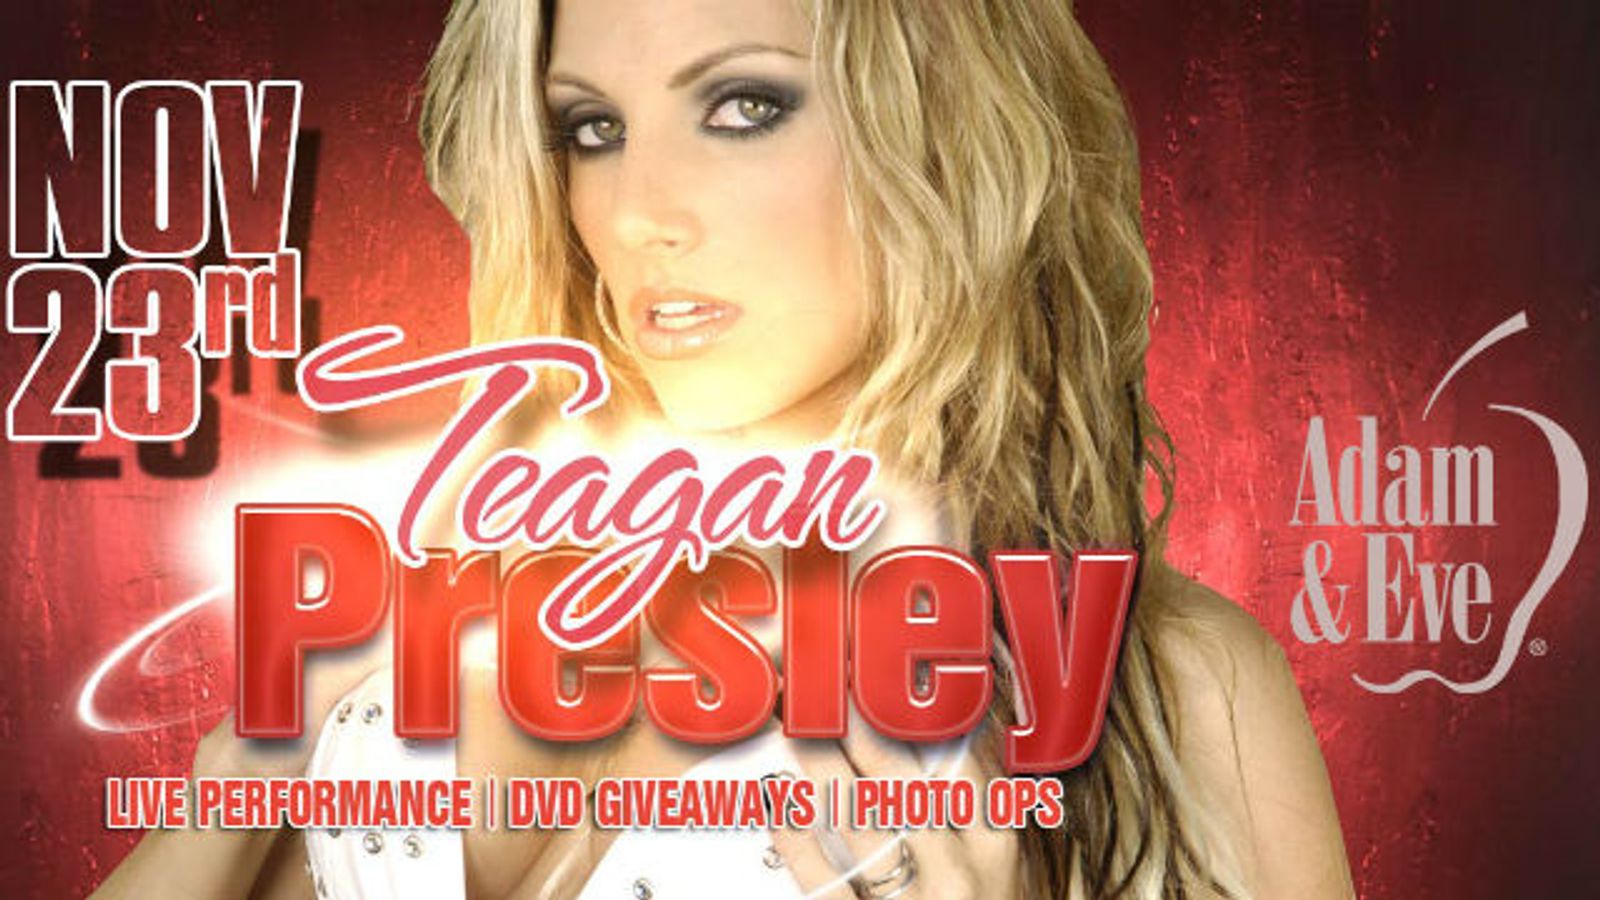 Teagan Presley Takes Another Bite Out Of Sapphire NYC, Nov. 23